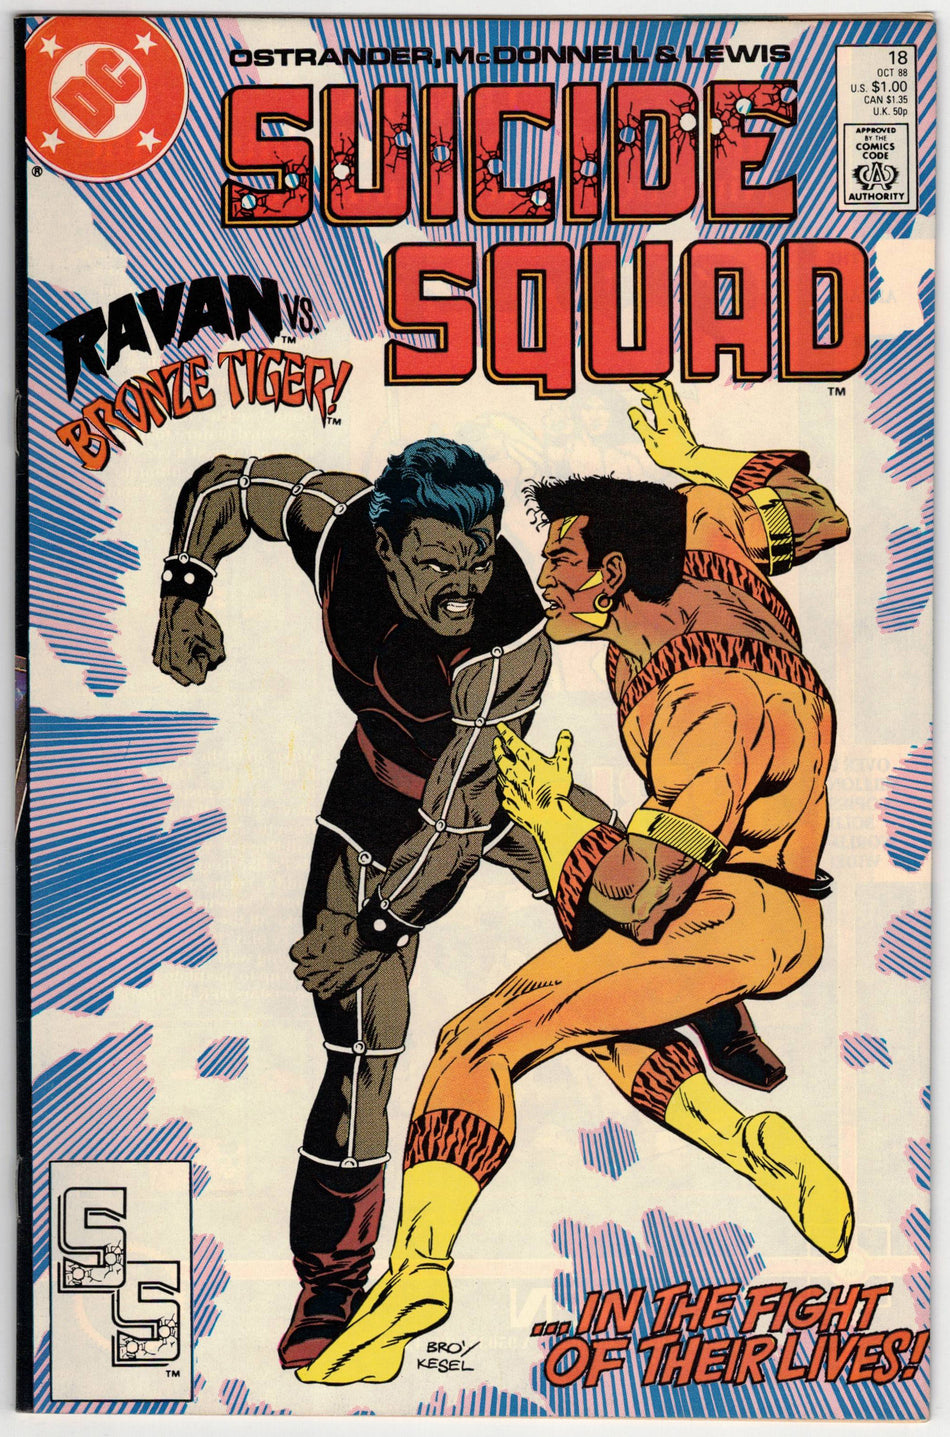 Photo of Suicide Squad, Vol. 1 (1988)  Issue 18  Comic sold by Stronghold Collectibles